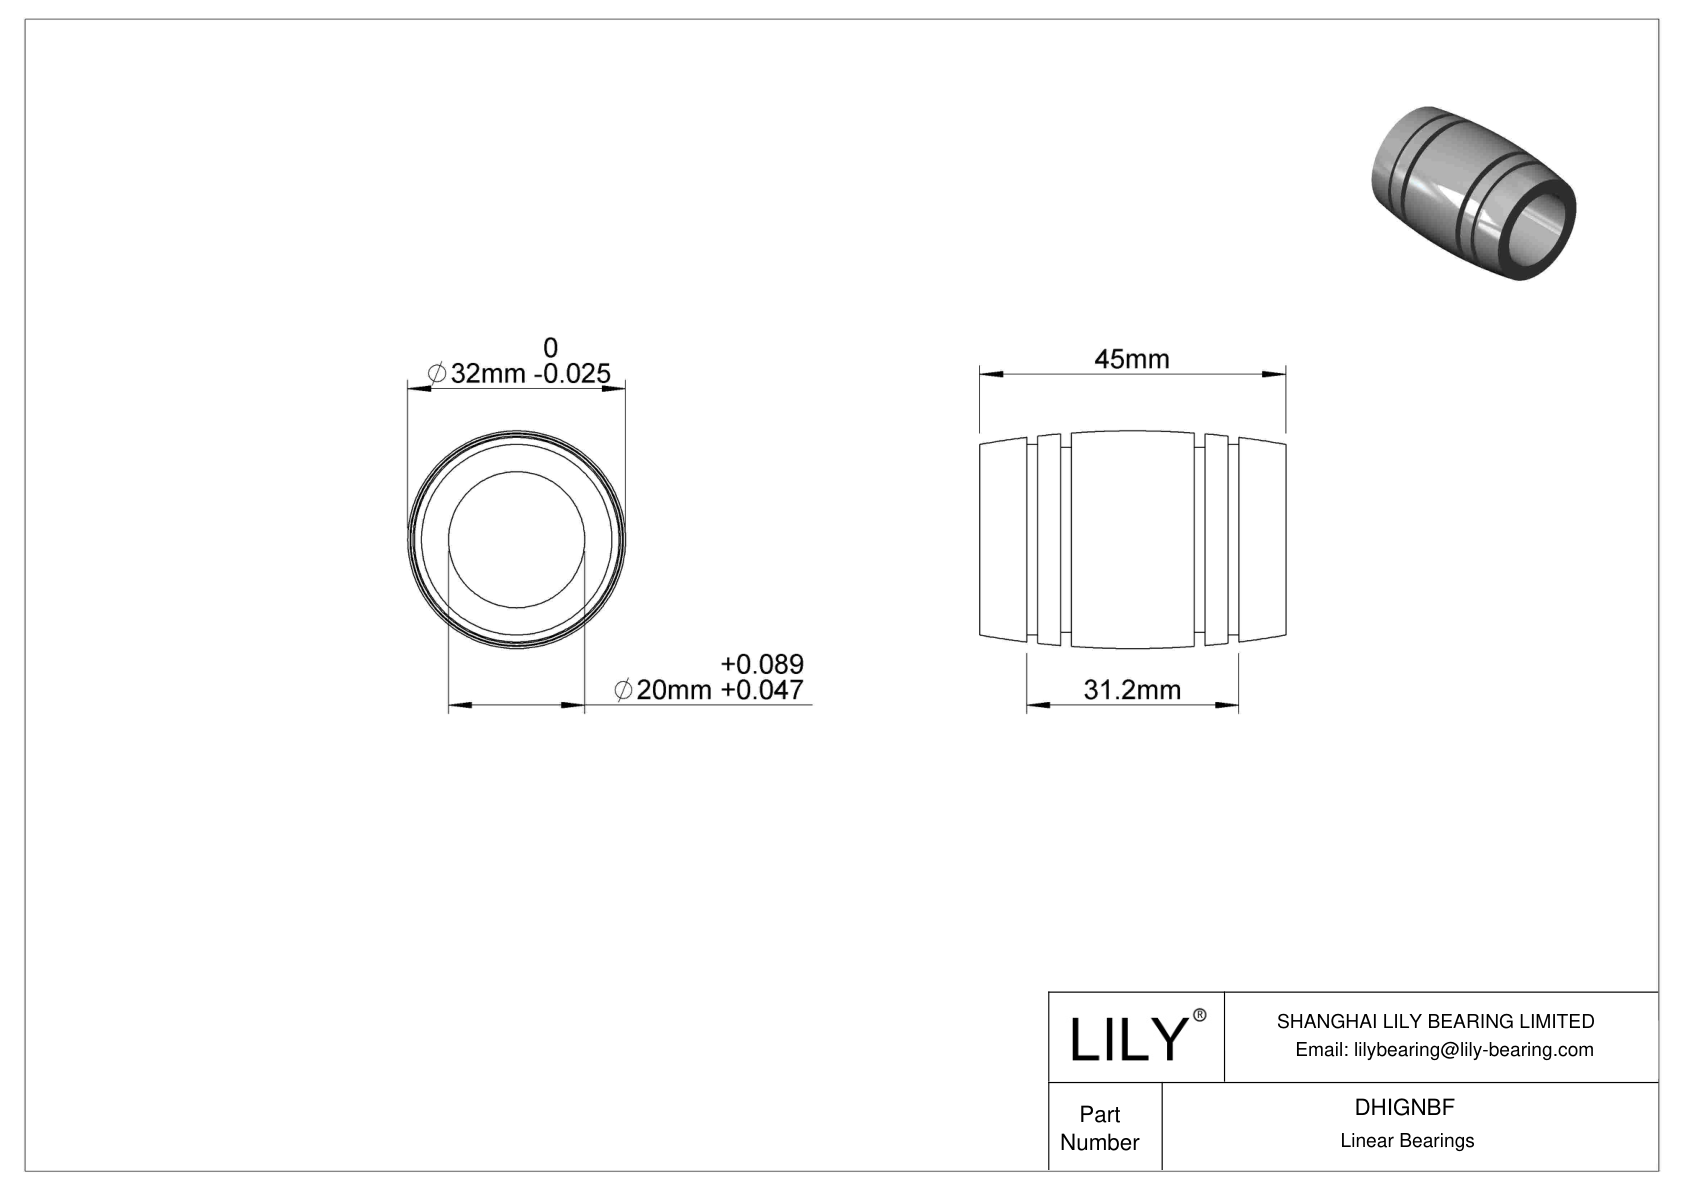 DHIGNBF Common Linear Sleeve Bearings cad drawing